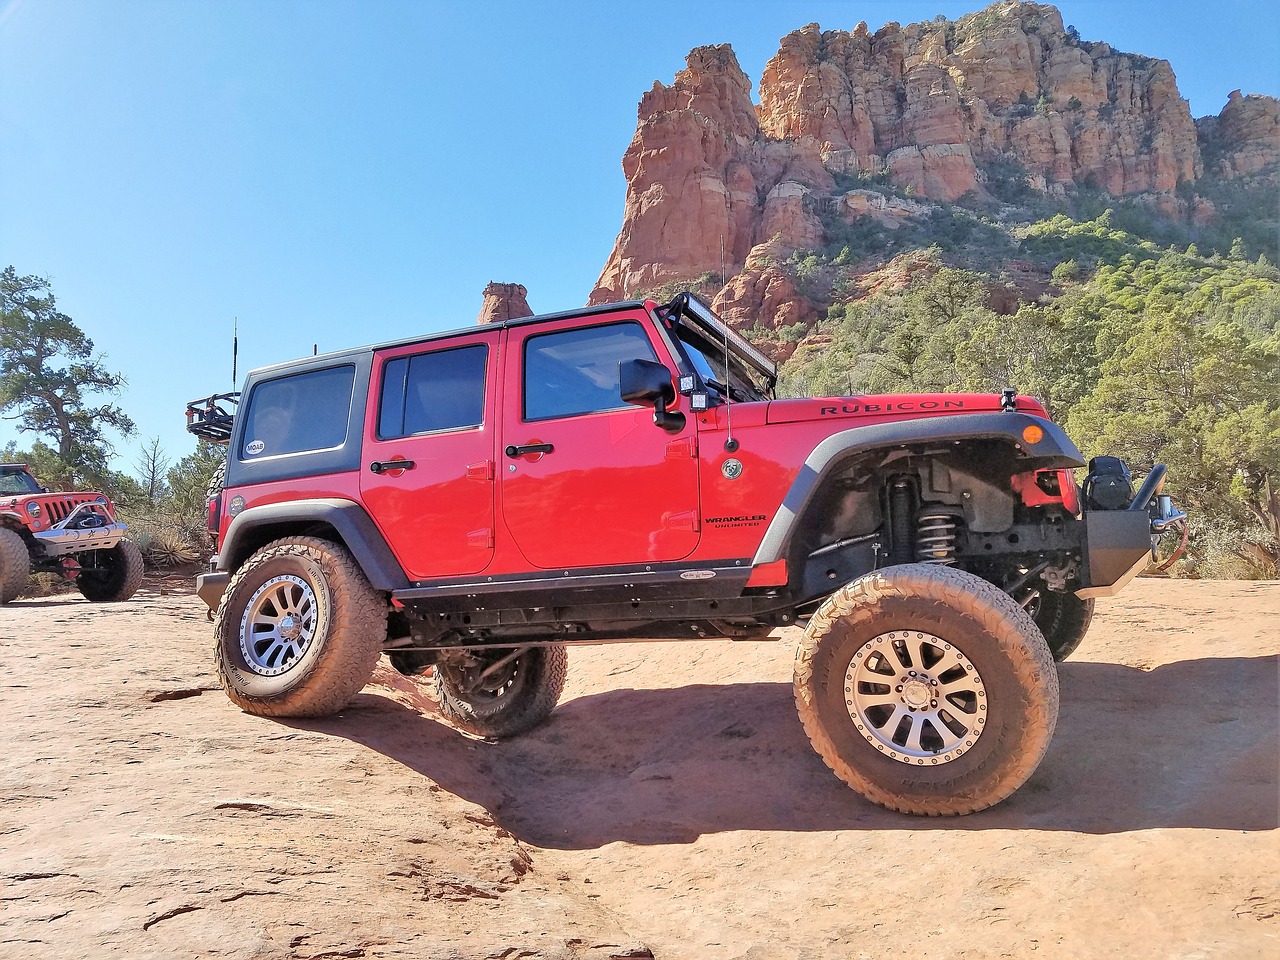 Jeep®s crawling over the red rocks of Sedona